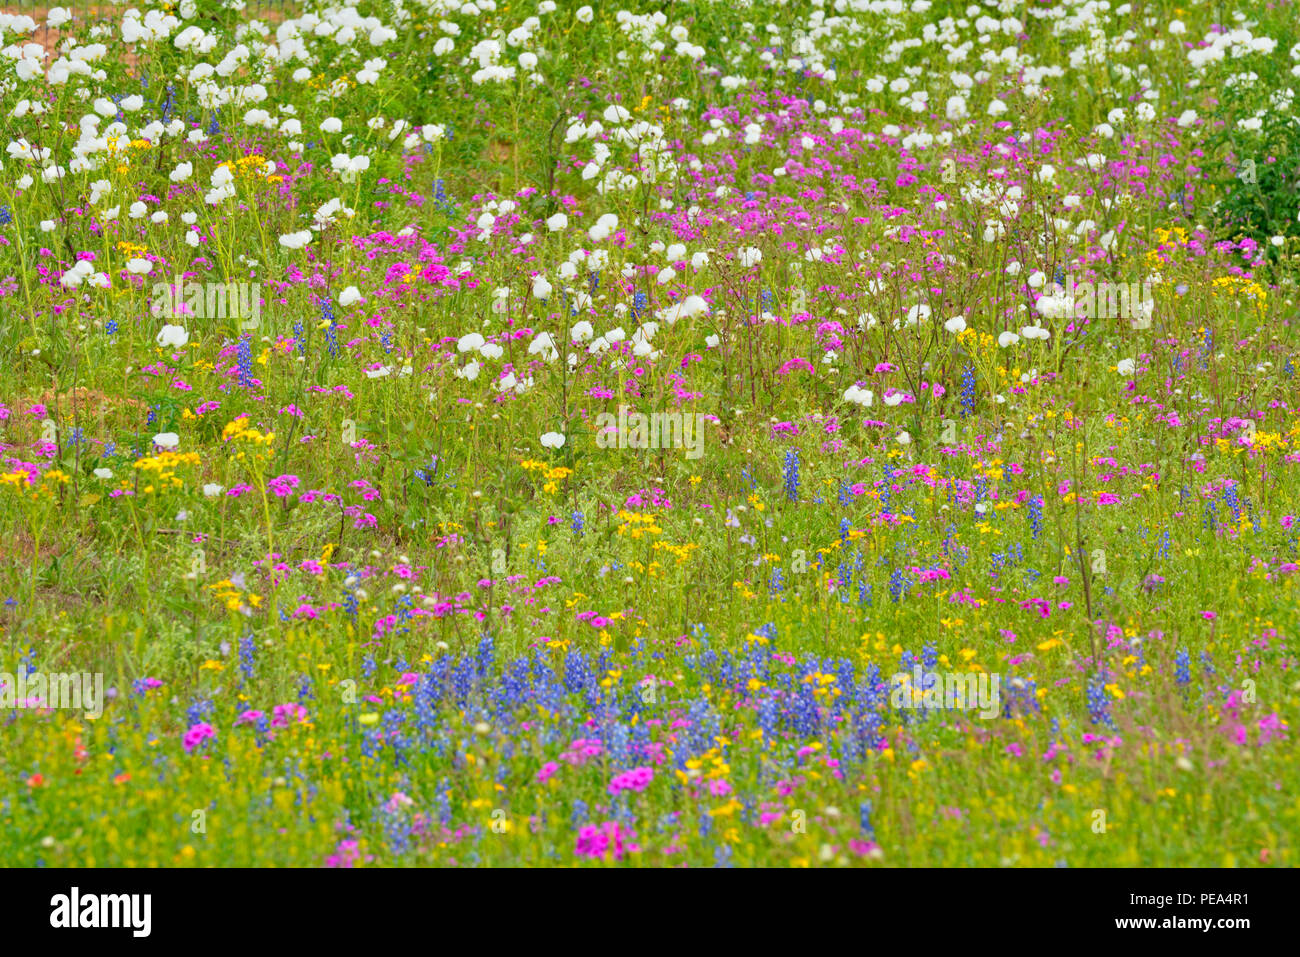 Texas wildflowers in bloom- Prickly poppies (Argemone spp.) and phlox, Floresville, Texas, USA Stock Photo